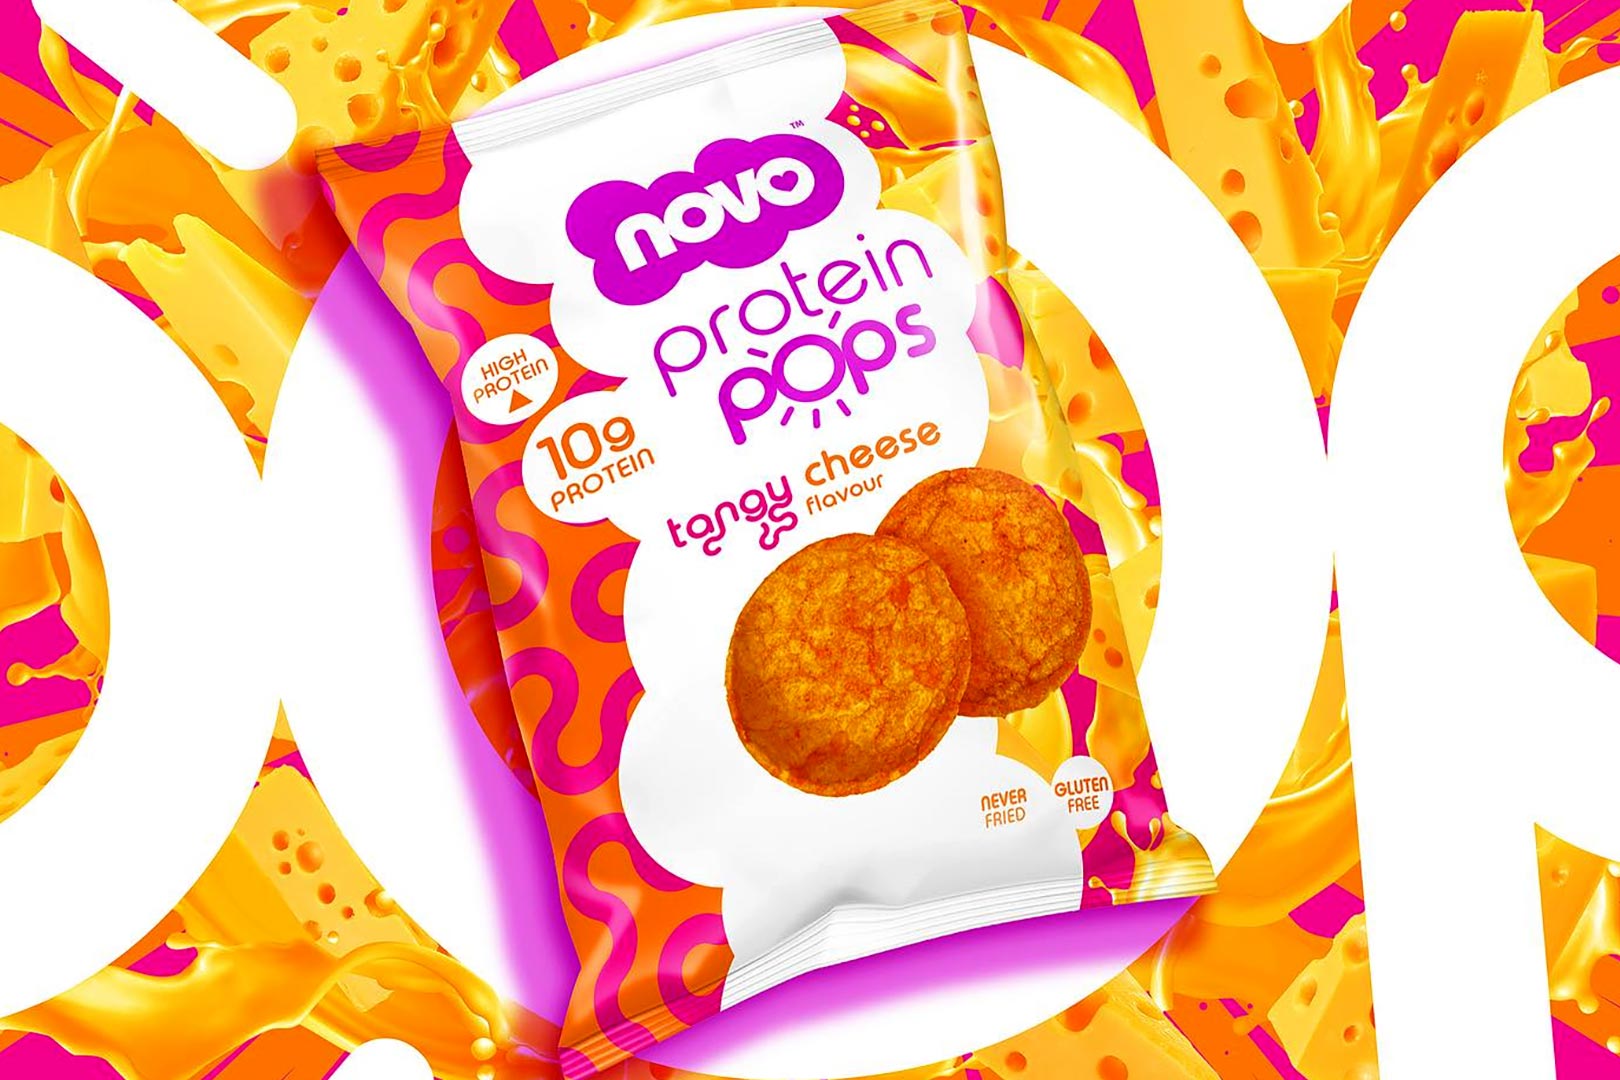 Tangy Cheese Novo Protein Pops